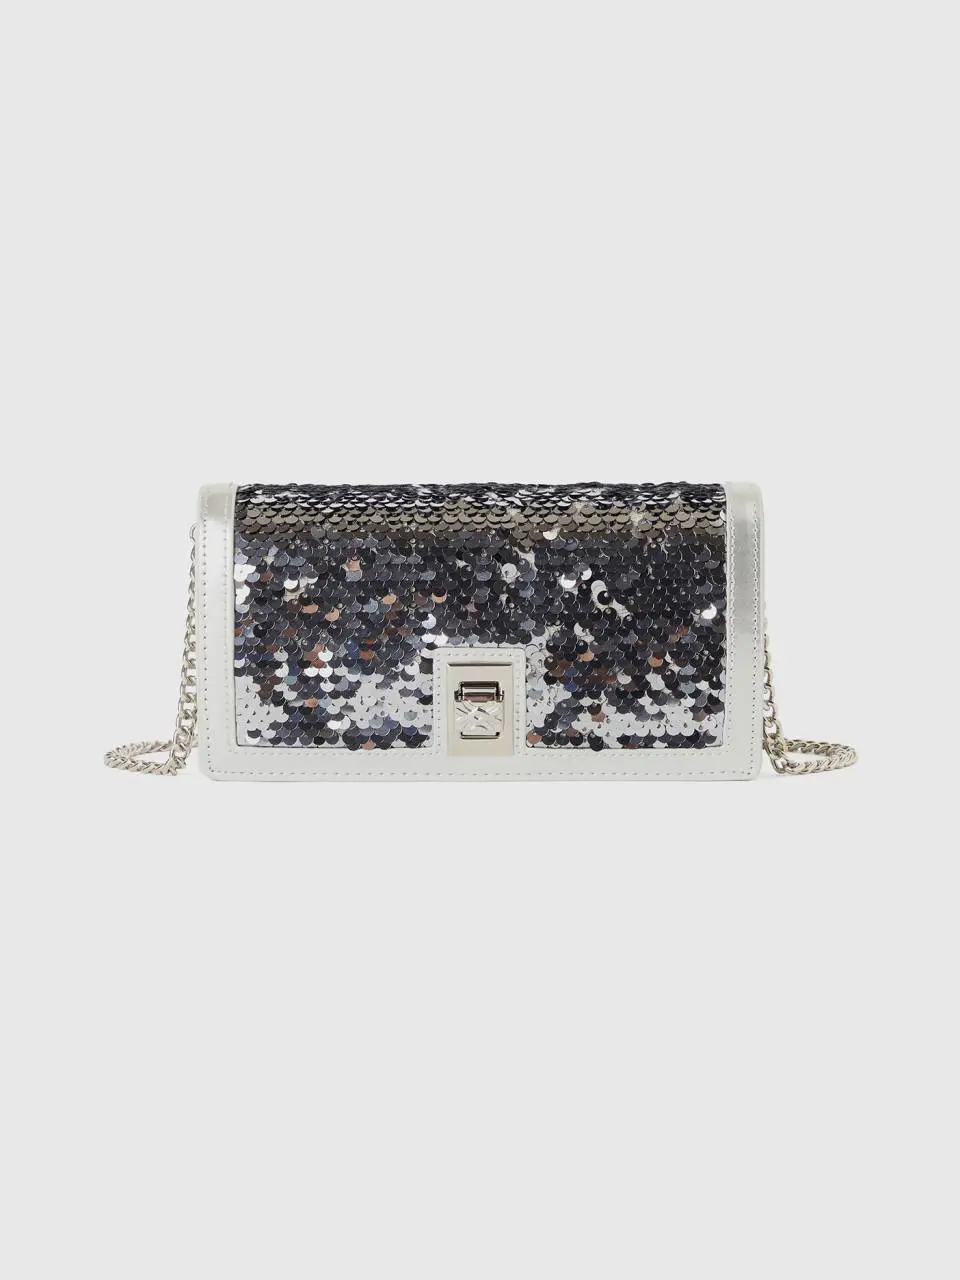 Benetton envelope clutch with sequins. 1